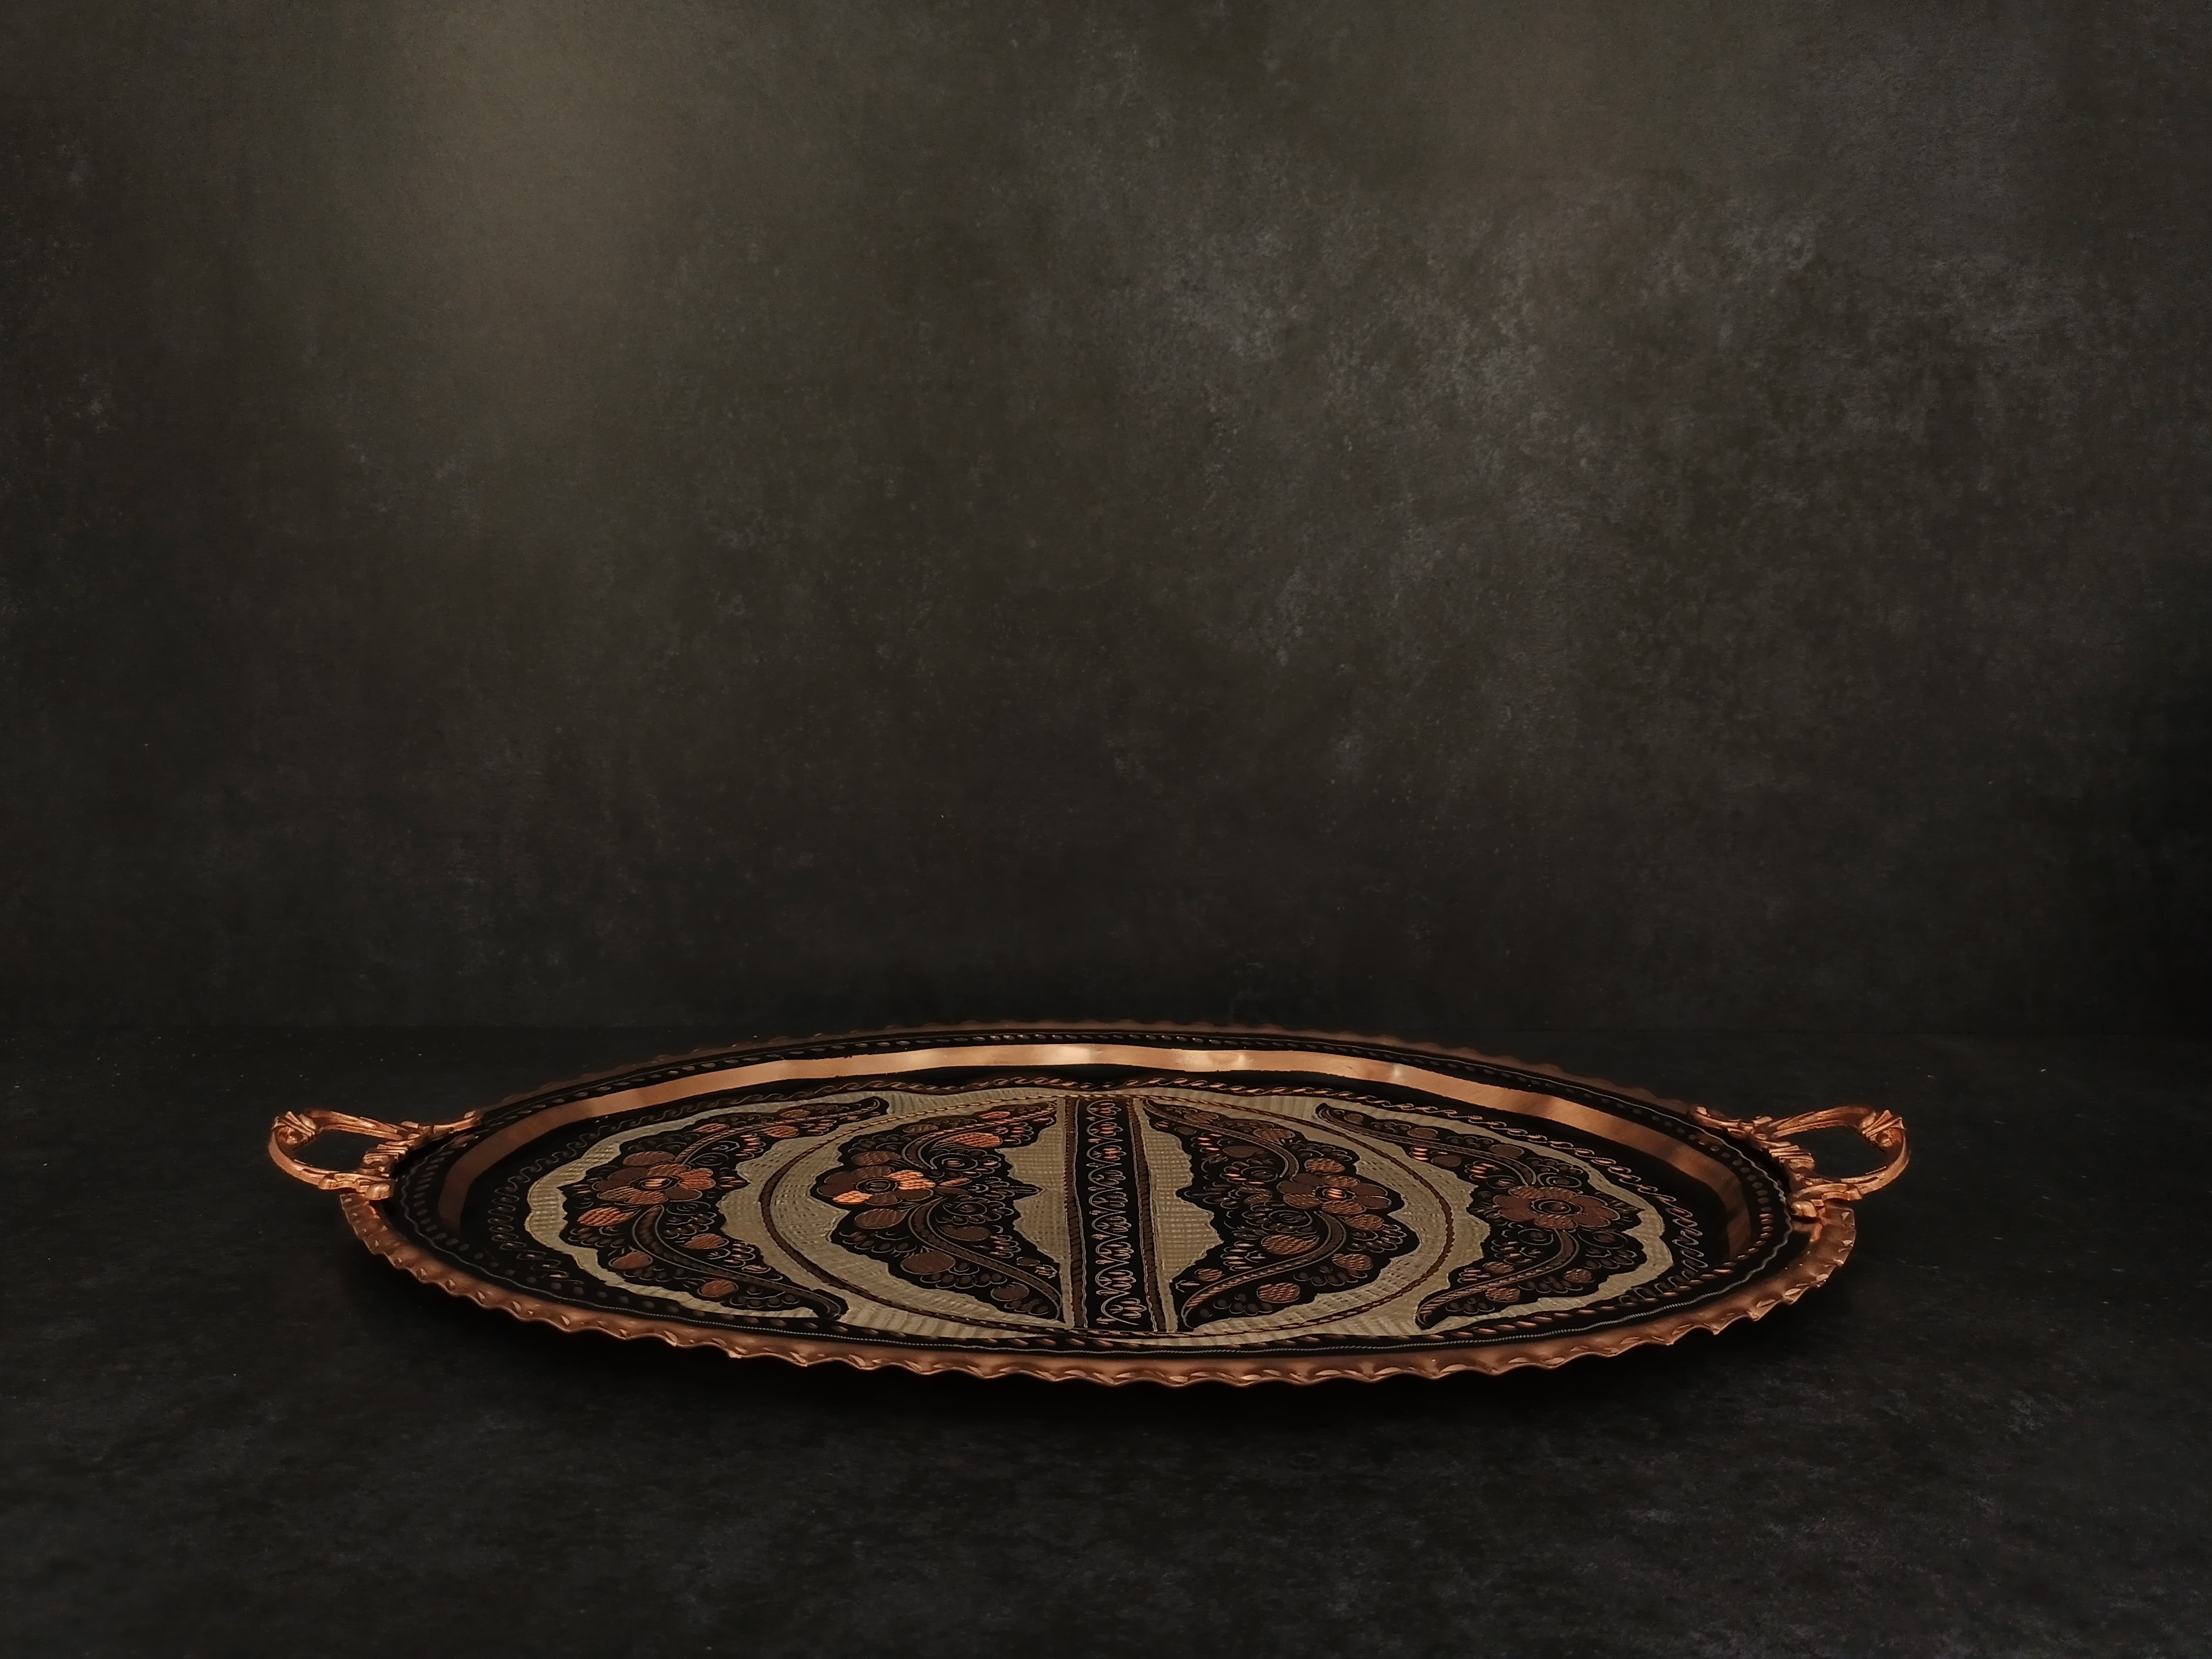 Turkish Handmade Copper Tray, Oval Serving Tray, Turkish Style Royal Decorated Coffee Table Tray